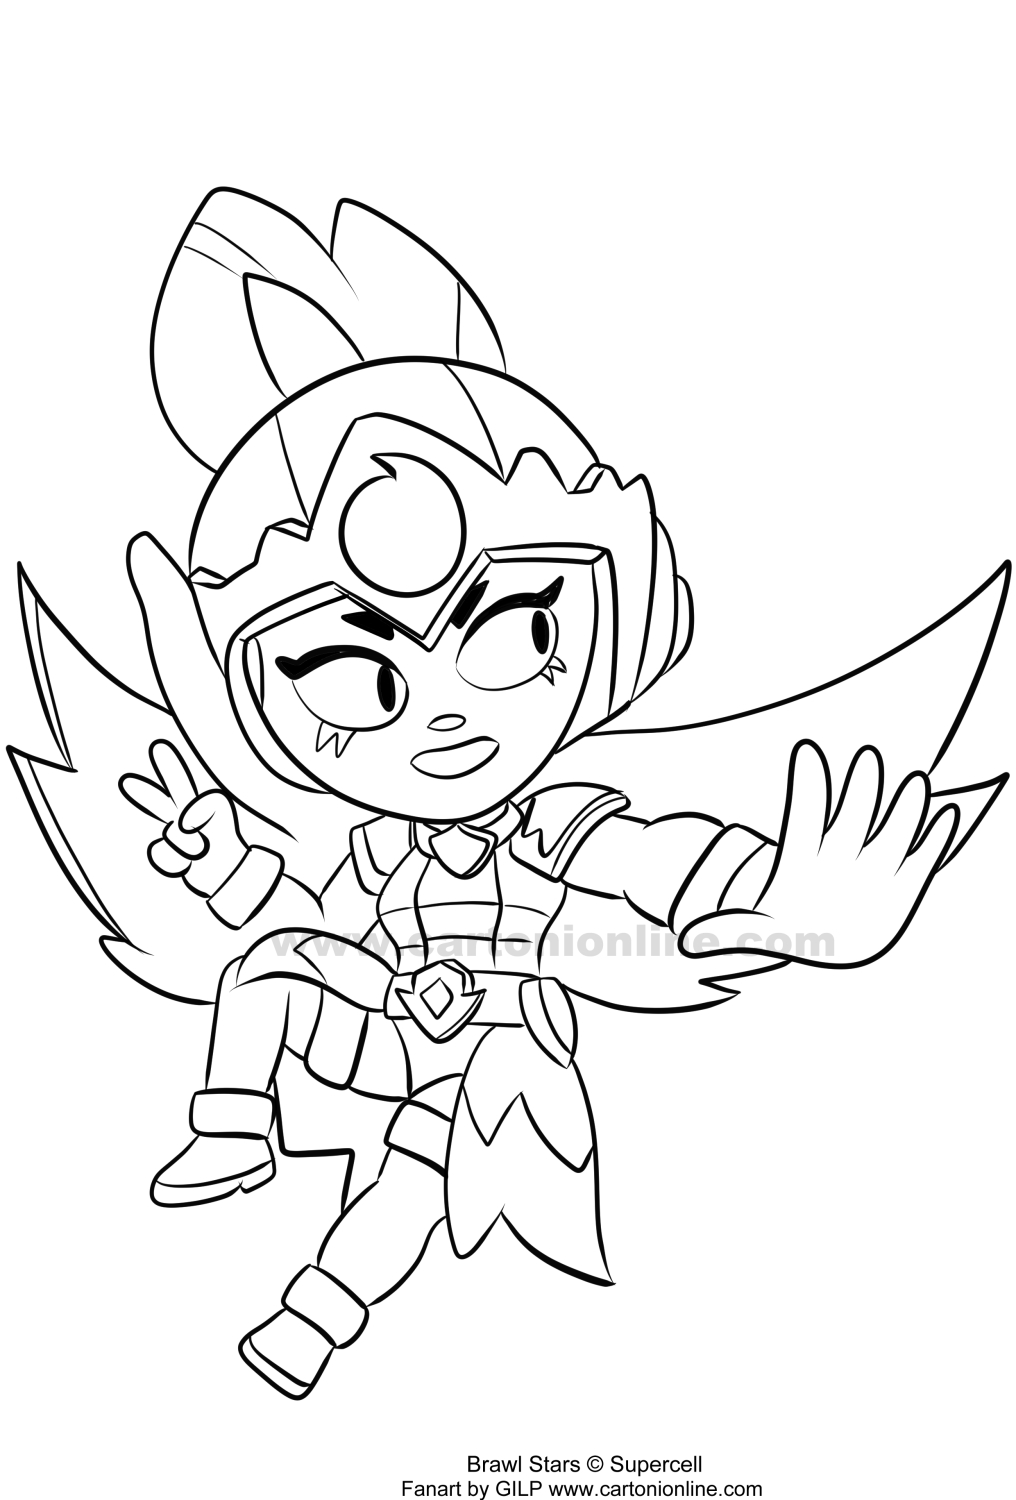 Janet 09 from Brawl Stars coloring pages to print and coloring